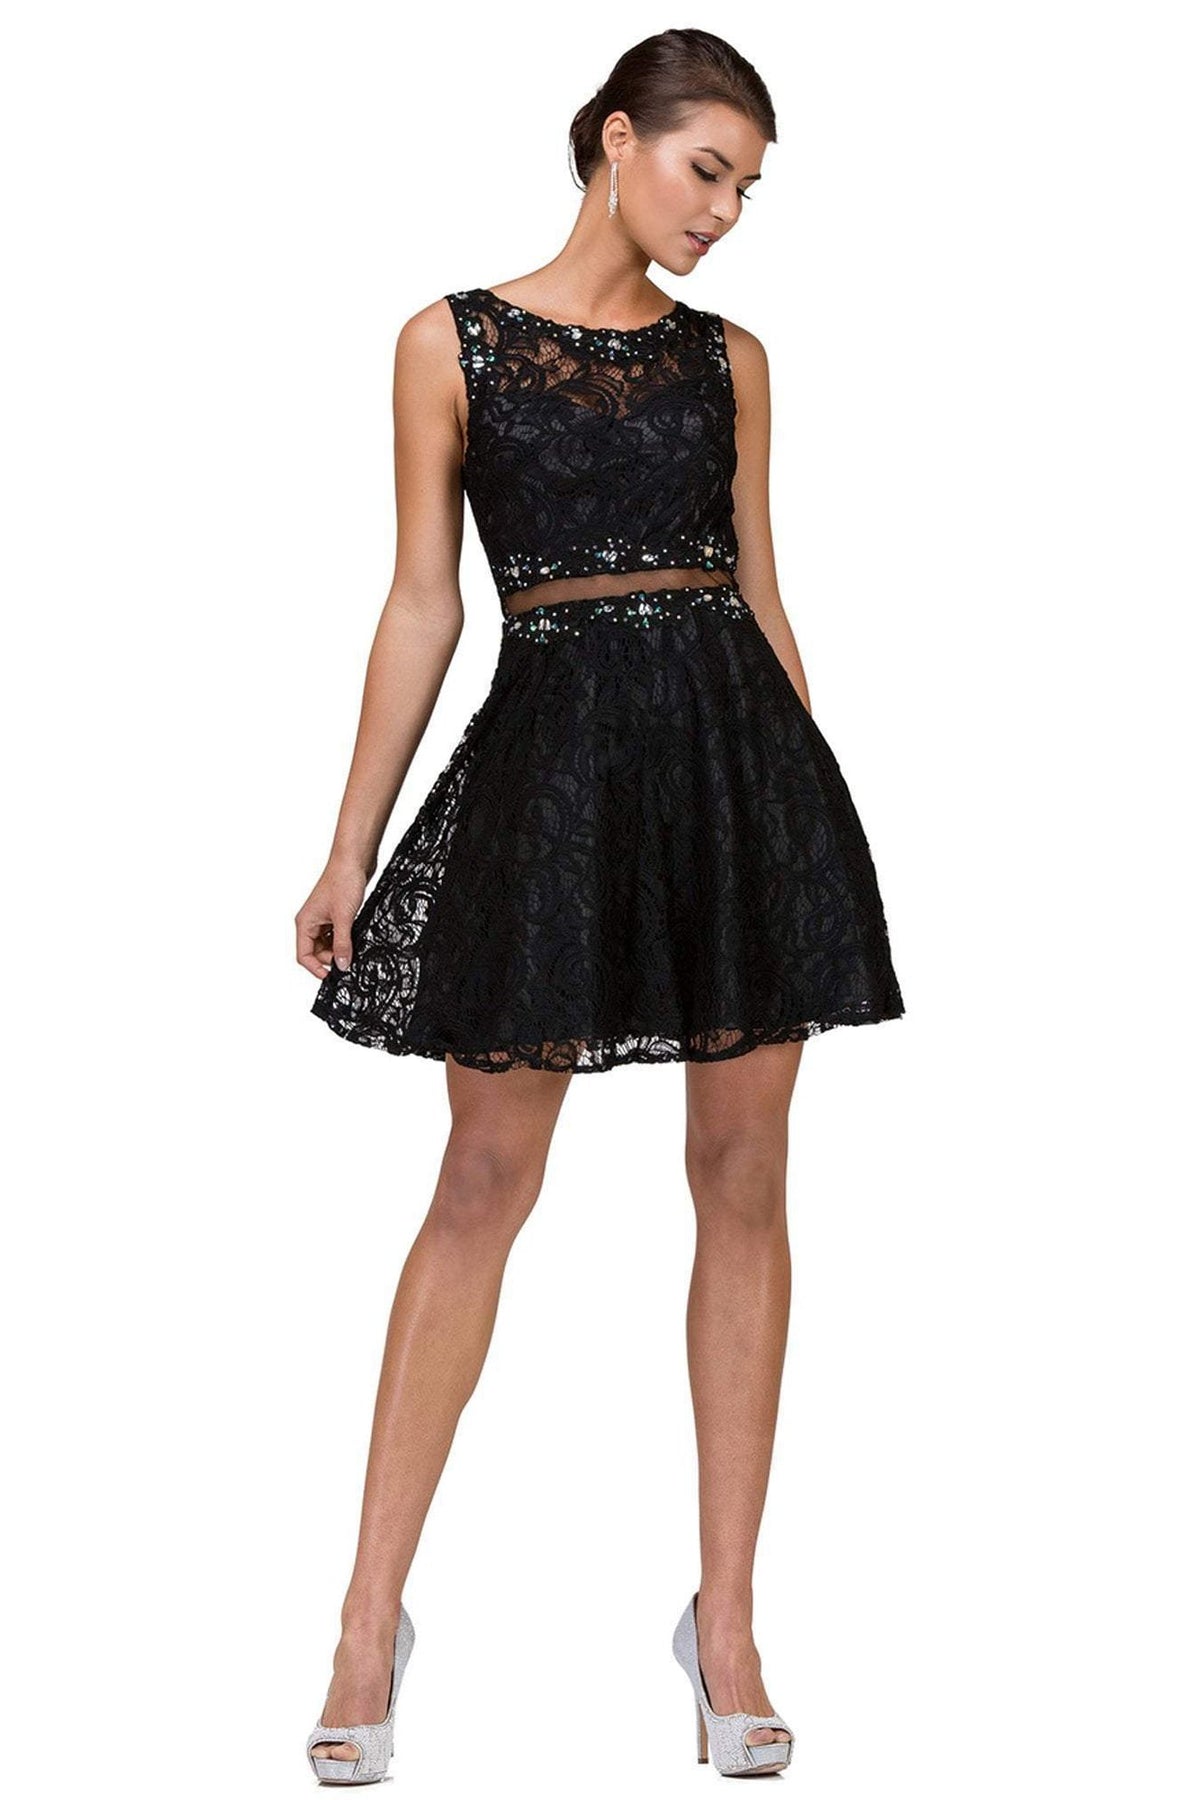 Dancing Queen Illusion Midriff Jeweled Lace A-Line Dress - 1 pc Black In Size S Available In Black